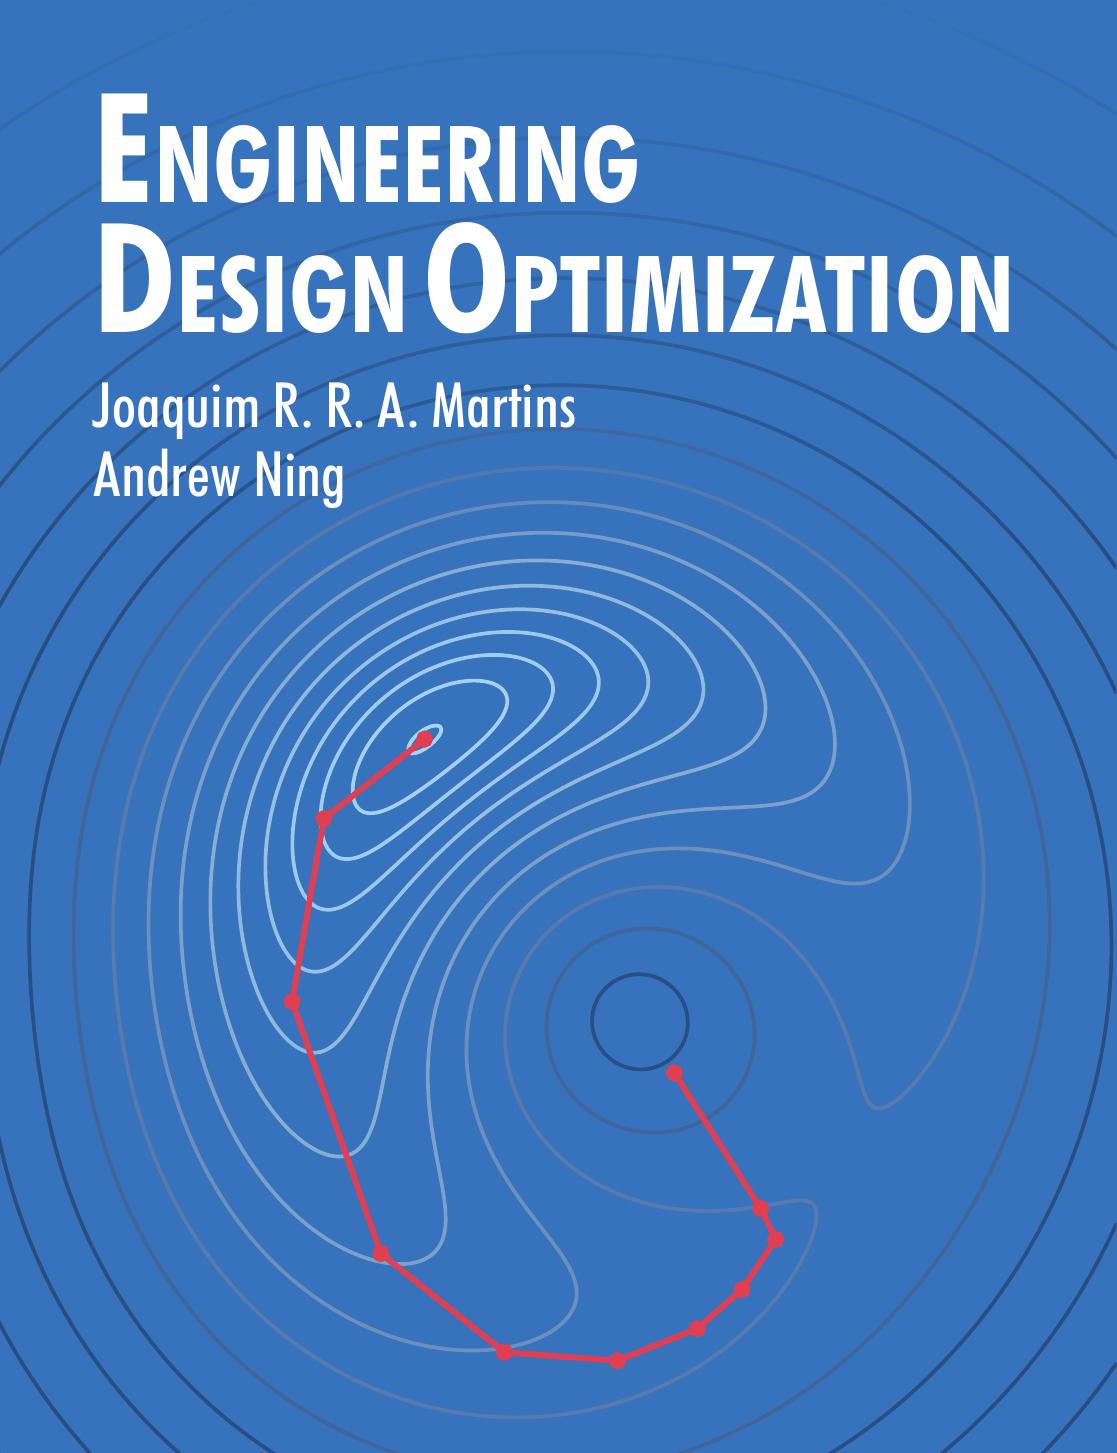 Engineering Design Optimization by Joaquim R. R. A. Martins Andrew Ning